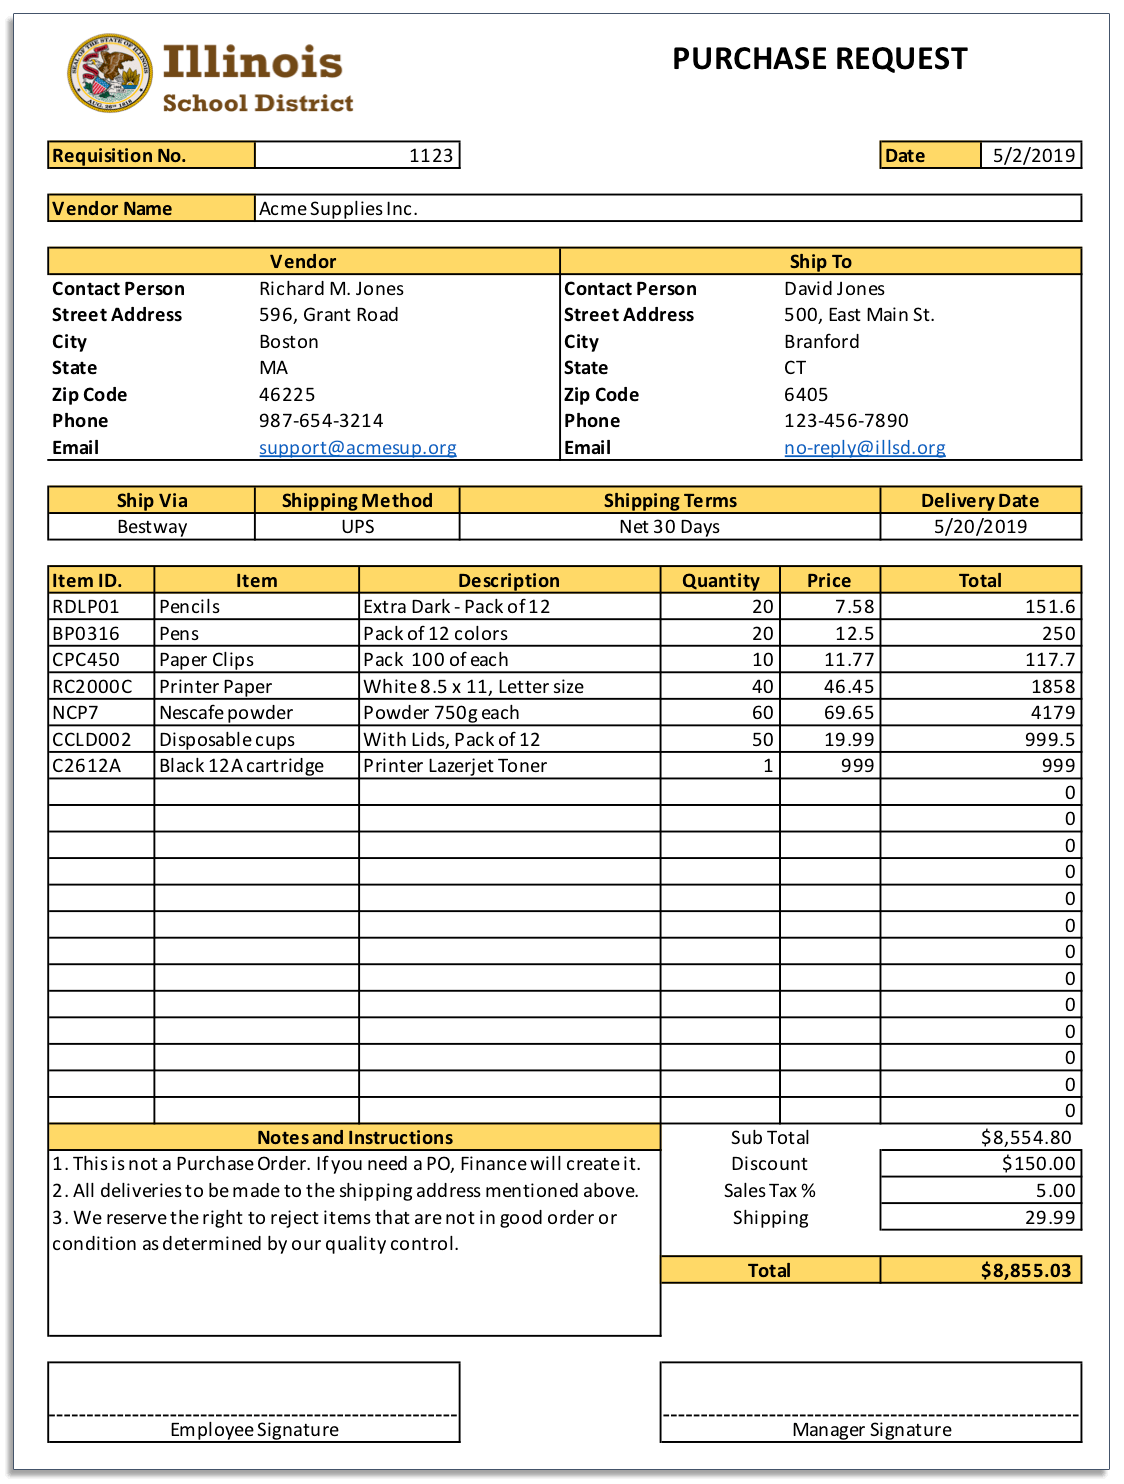 Example of a purchase requisition form